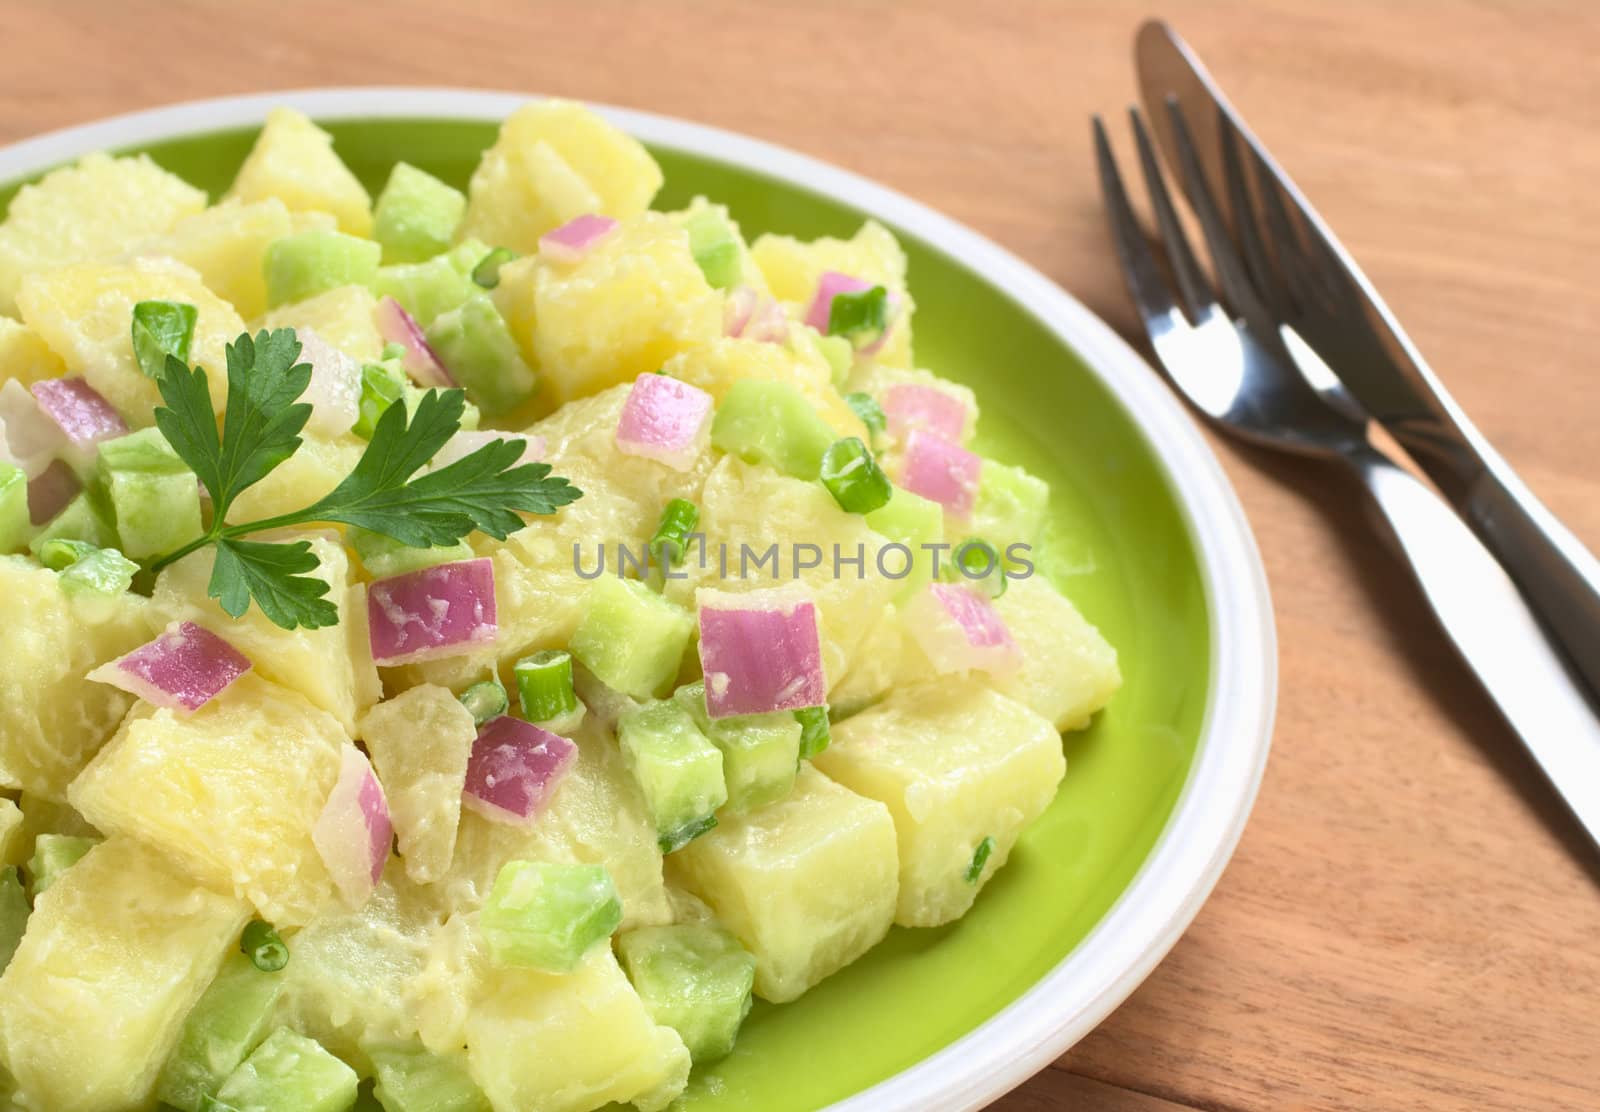 Potato salad with green and red onions and cucumber with a mayonnaise-cream dressing garnished with a parsley leaf (Selective Focus, Focus on the front of the salad)  